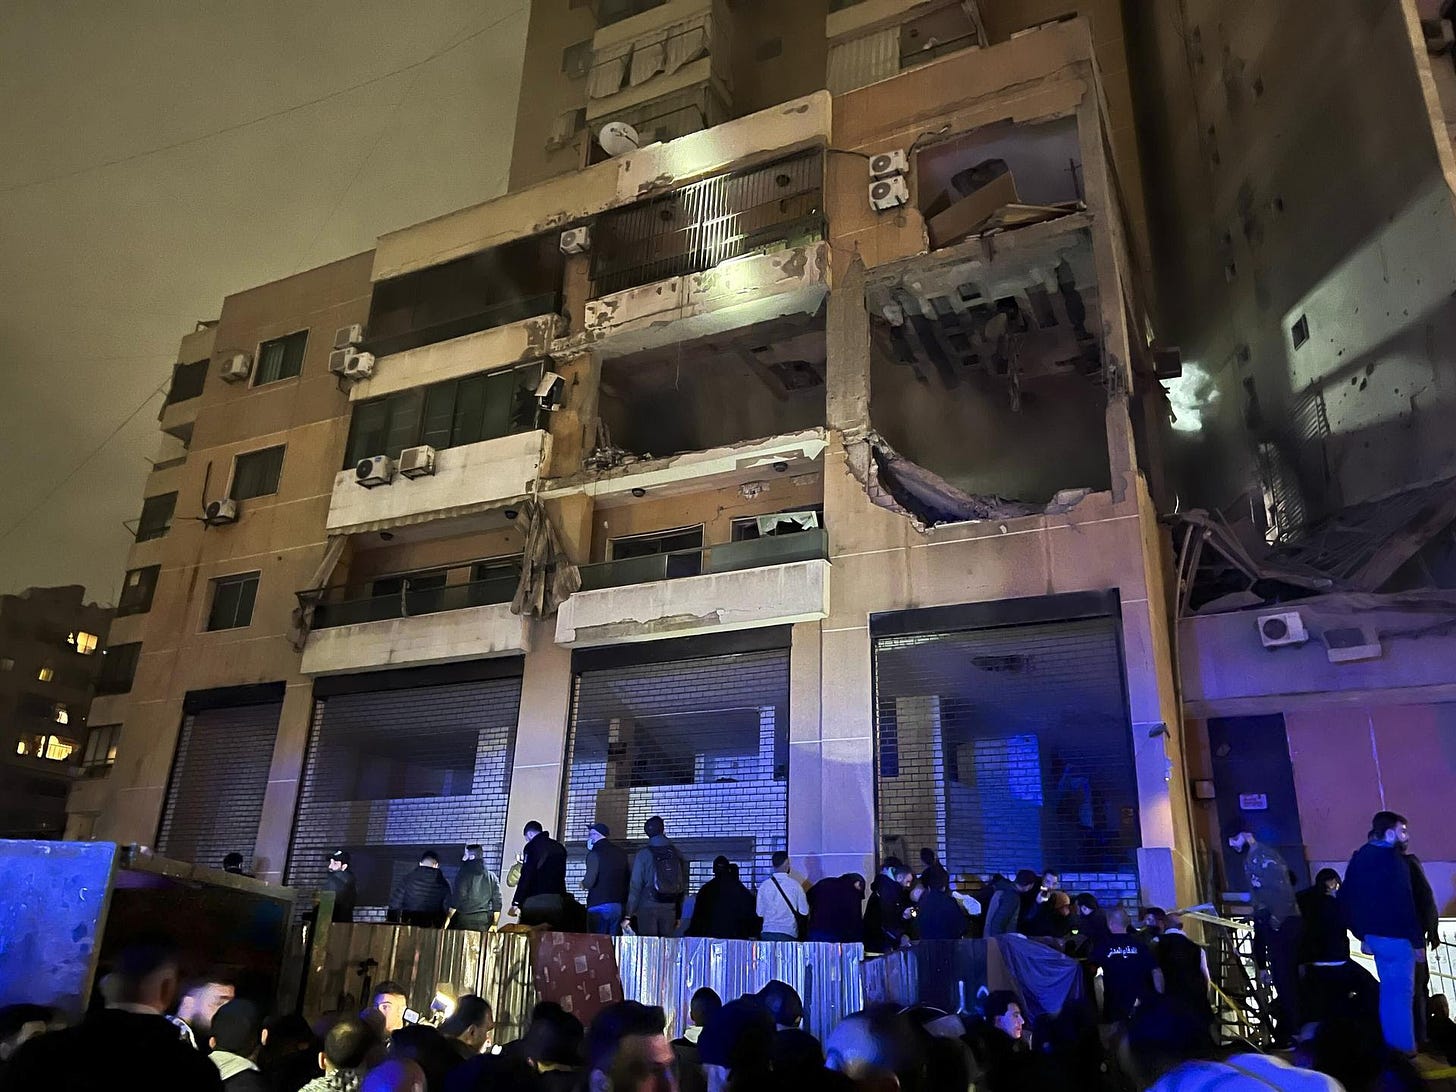 People stand outside a building after an explosion.